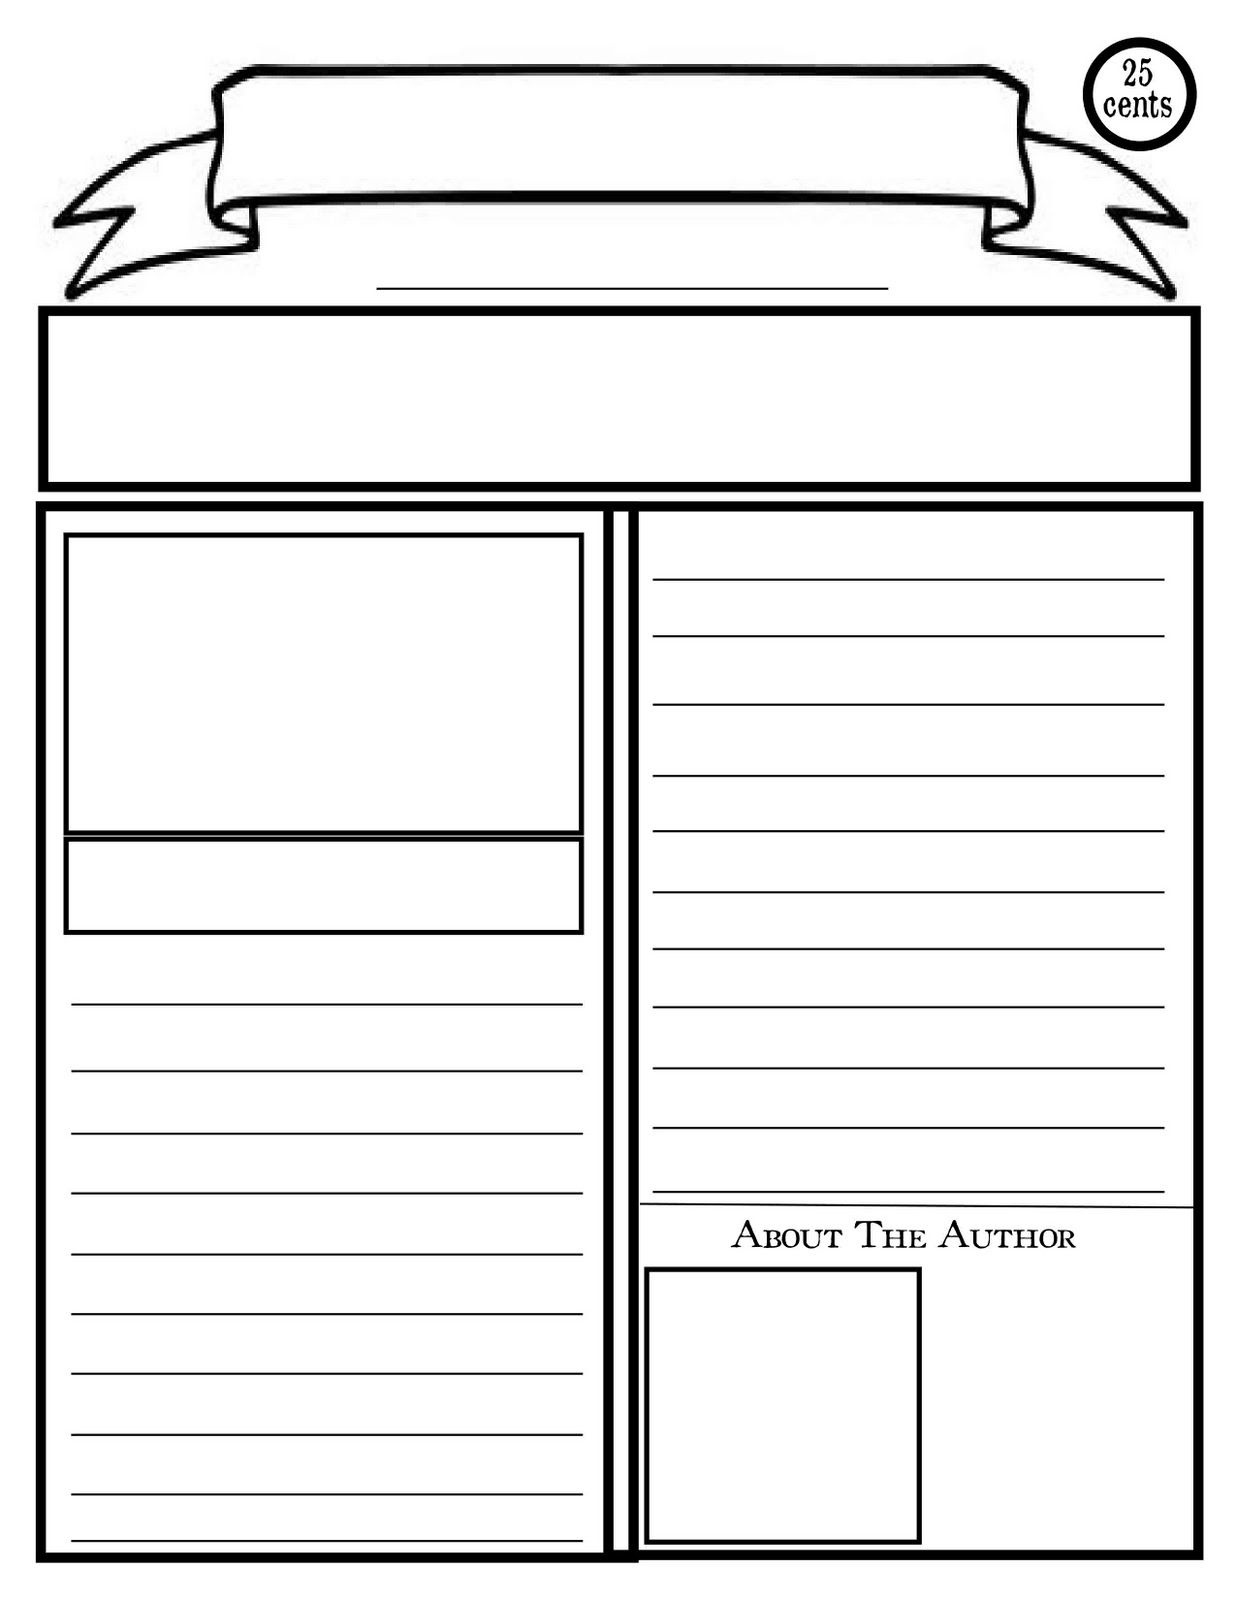 Blank Newspaper Template For Kids Printable | Homework Help - Free Printable Newspaper Templates For Students